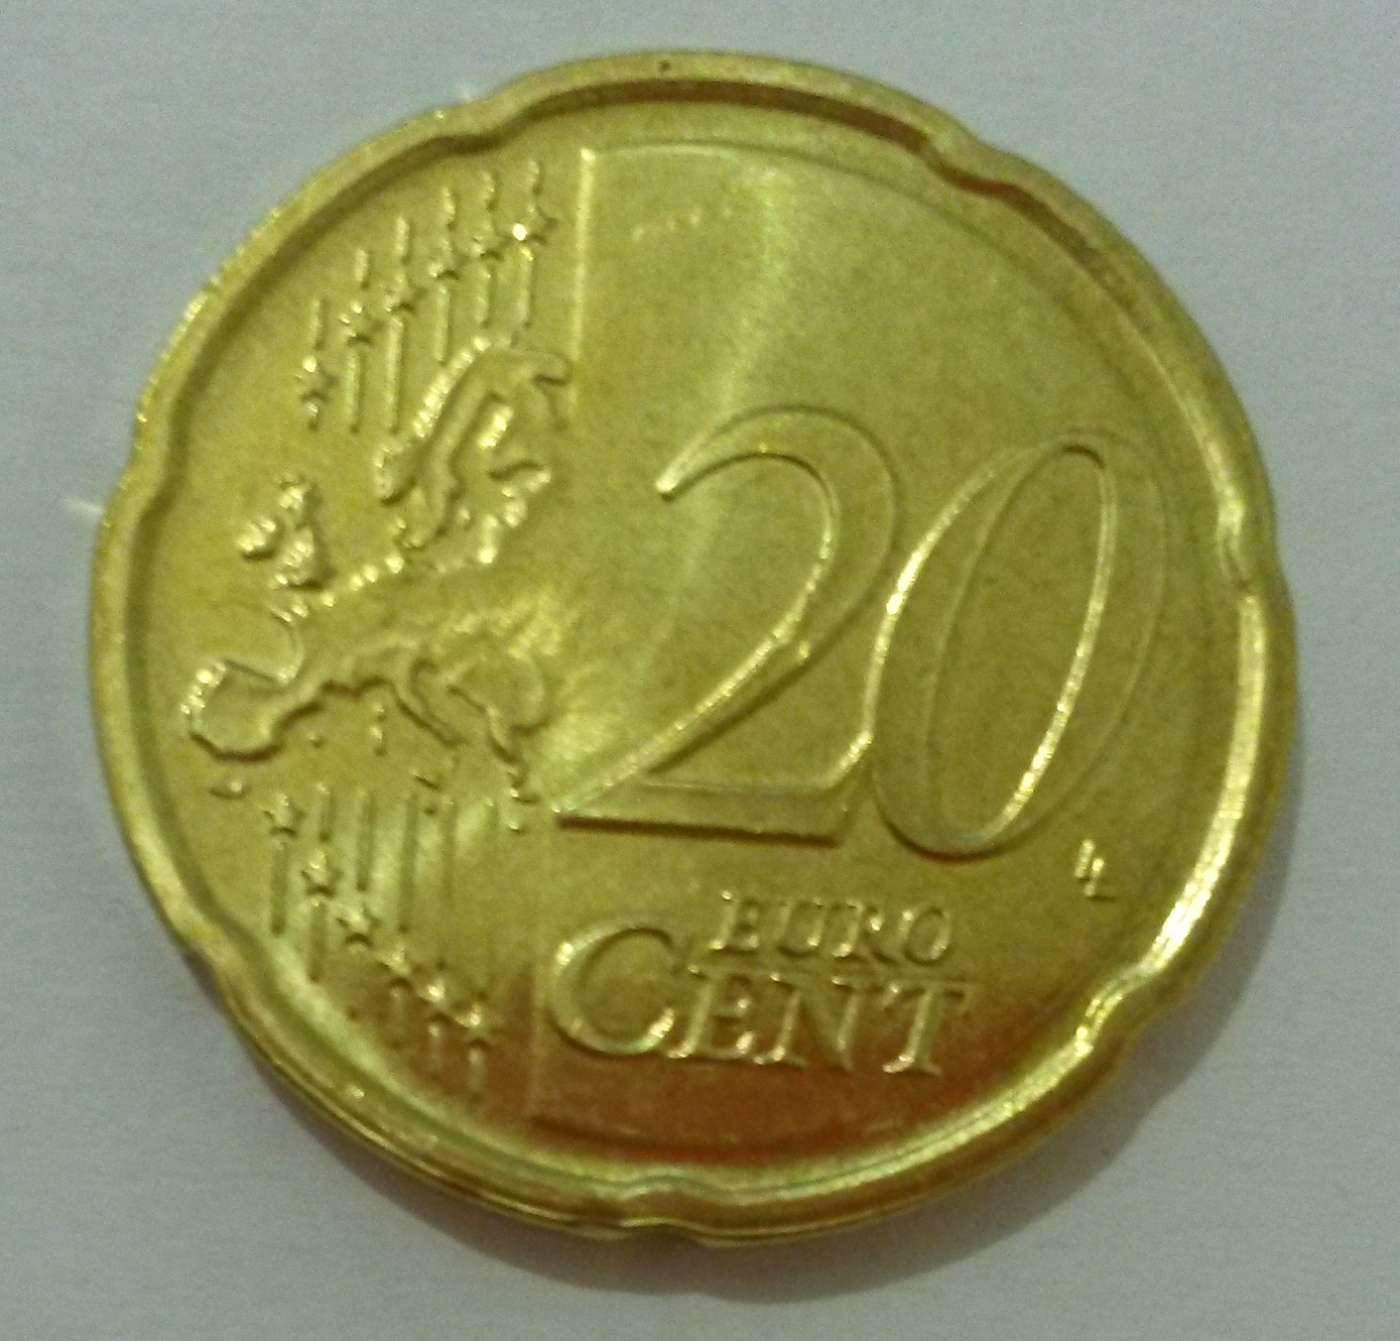 convert 20 euro cent to dollars